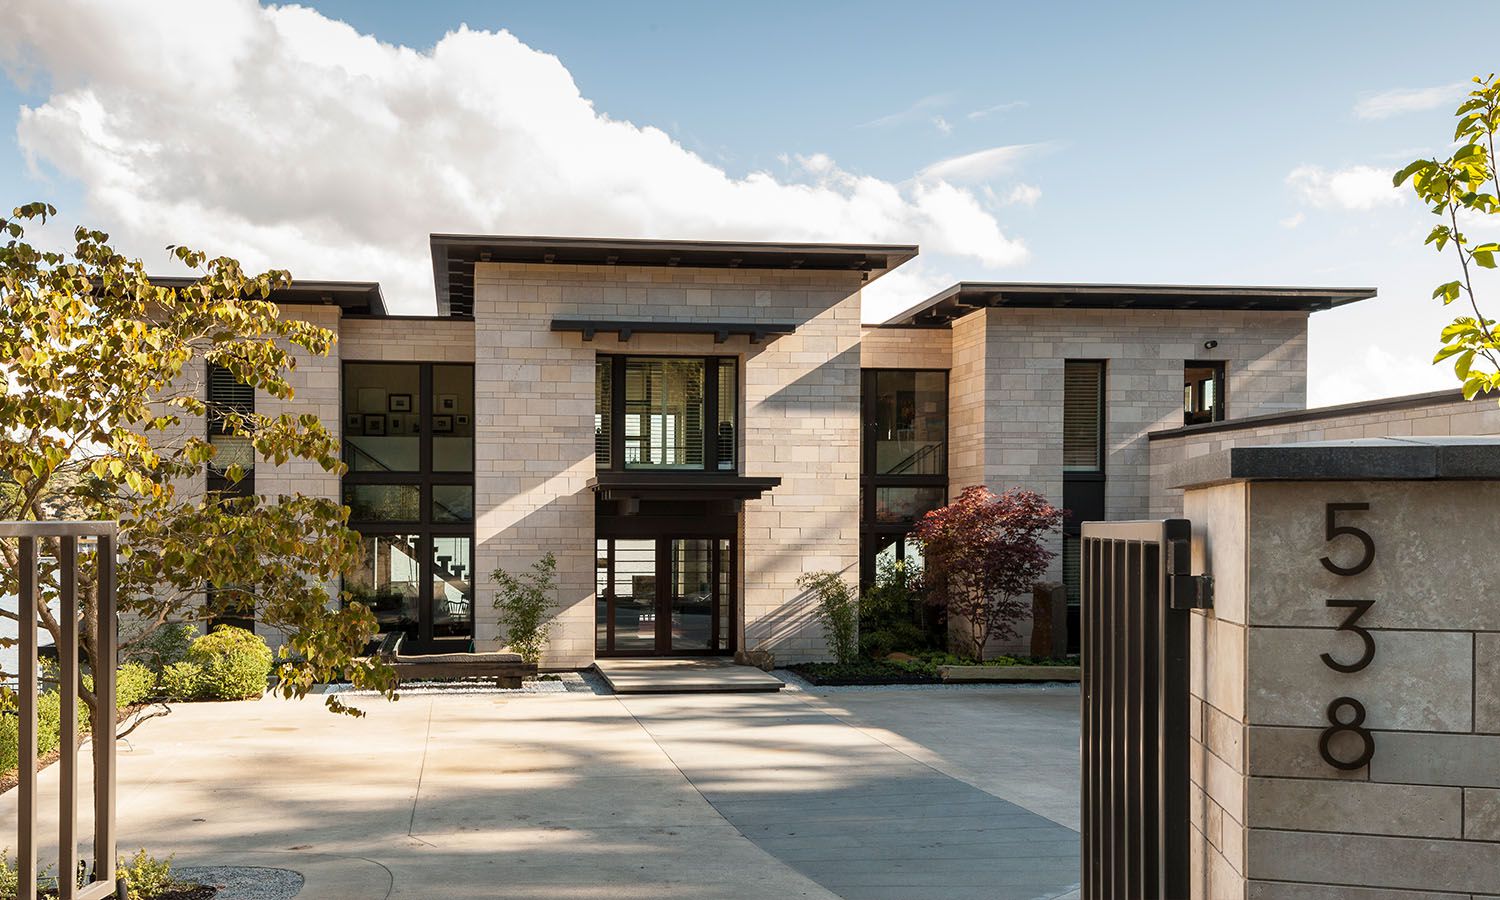 Custom home architecture brings symmetry to this lakeside Meydenbauer home.